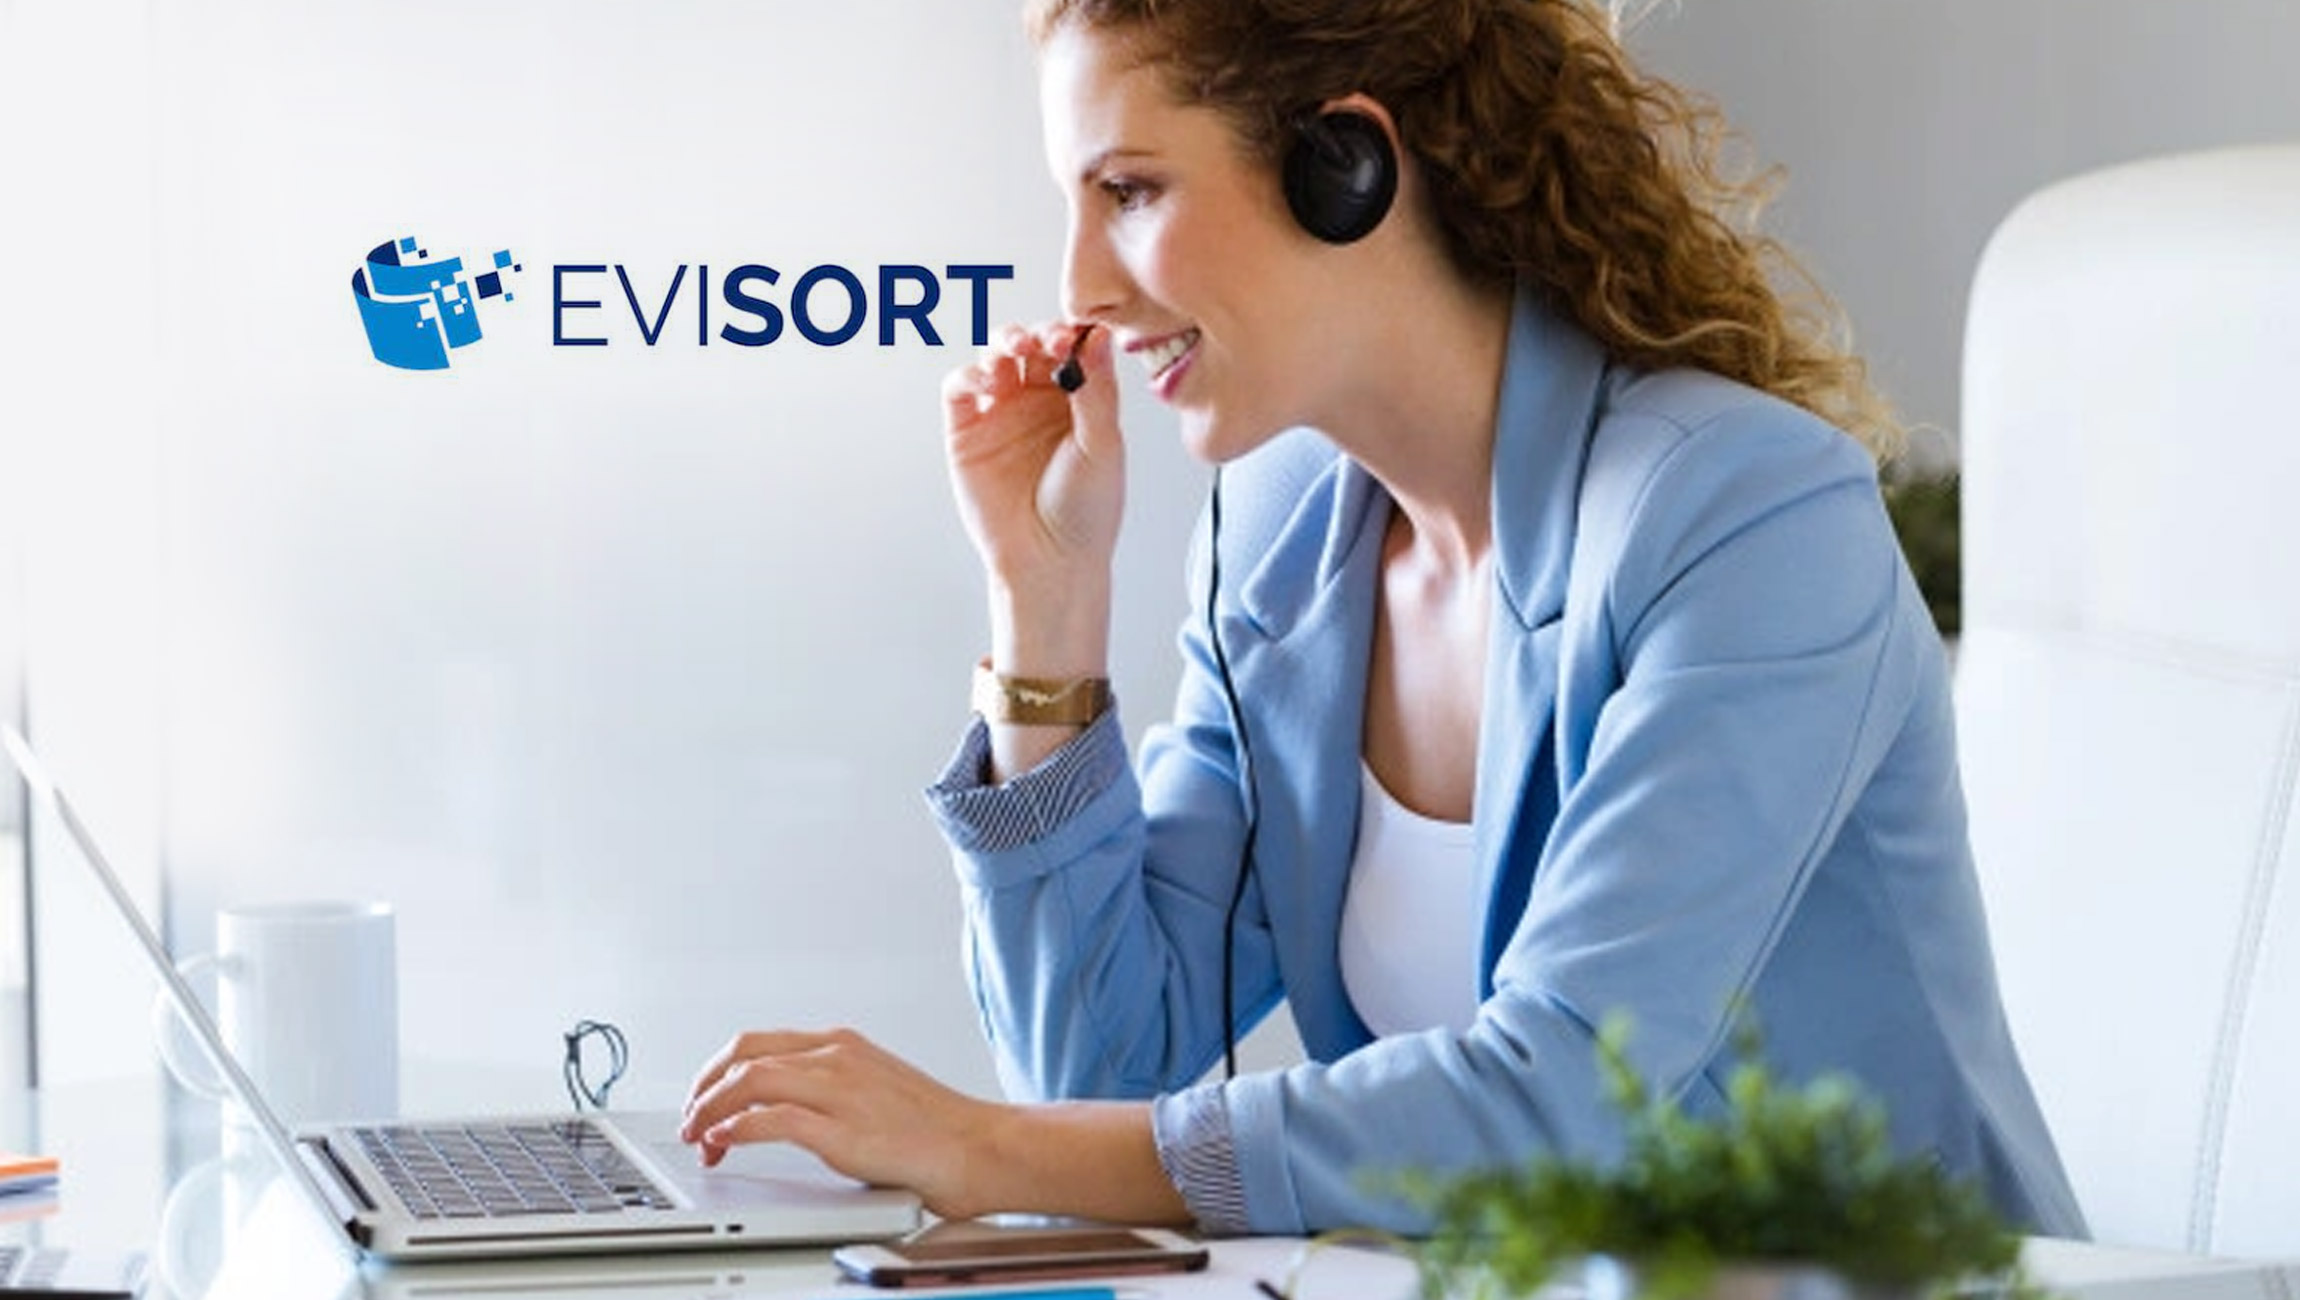 Evisort Recognized as Overall Leader for Contract Management and CLM in G2 Crowd’s Fall 2021 Report